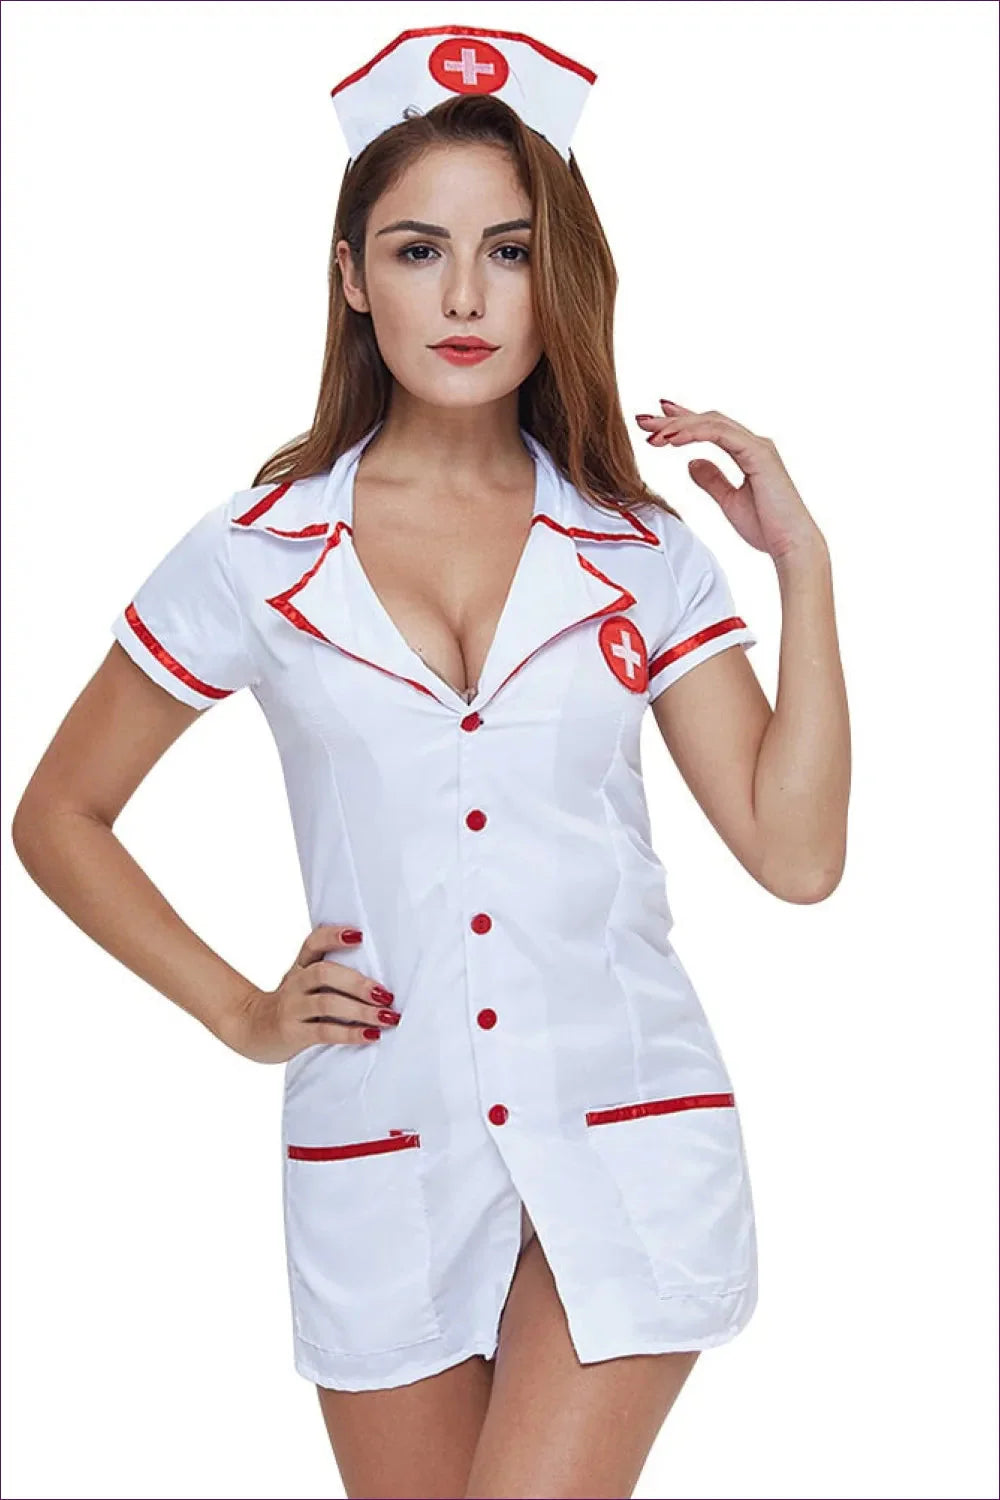 Embrace Classic Comfort With This Short Sleeve Button-up Nurse Uniform. Complete Dress, Headpiece, And Briefs.